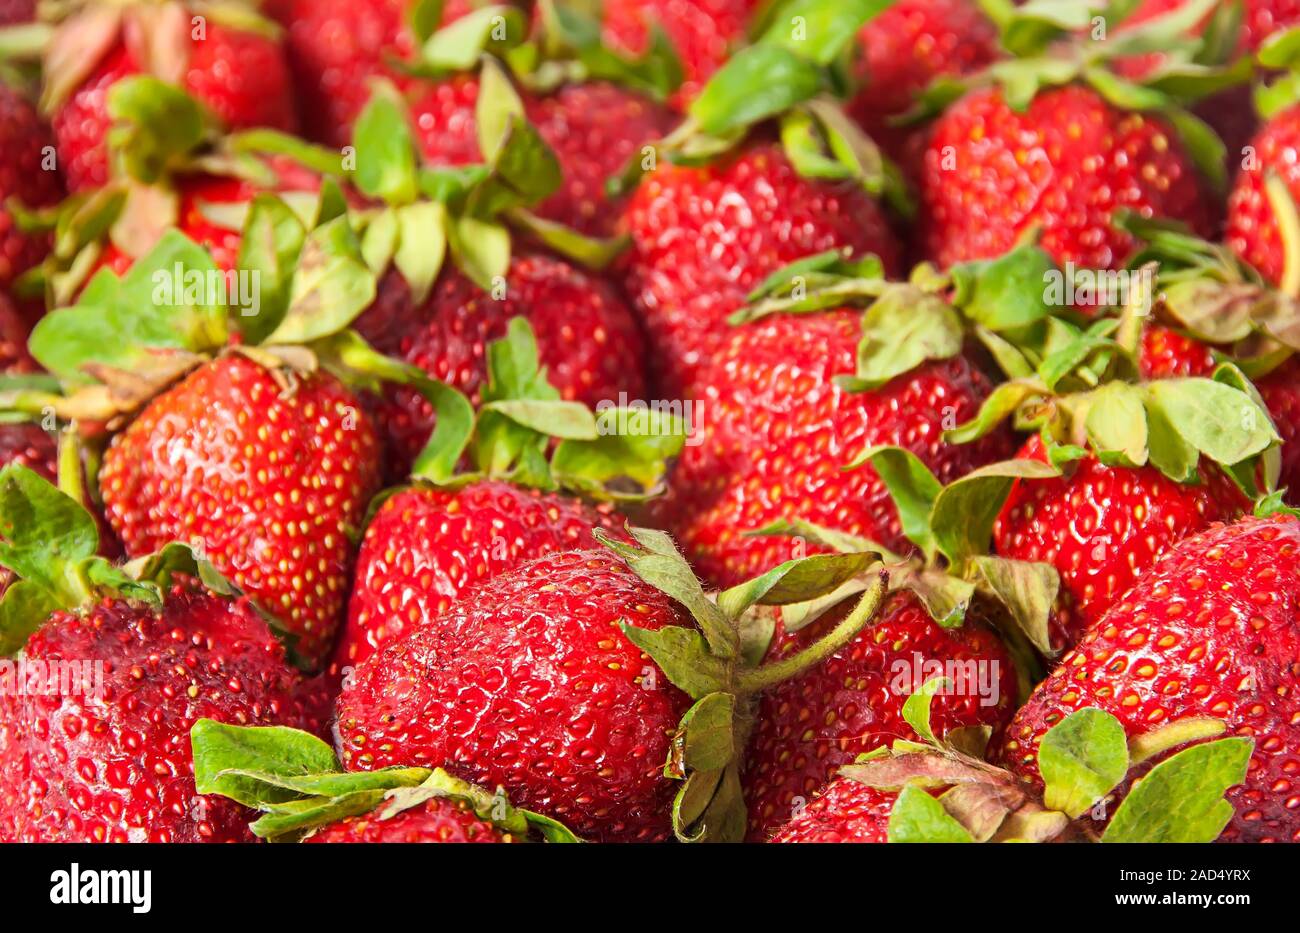 Red strawberries with green tails Stock Photo